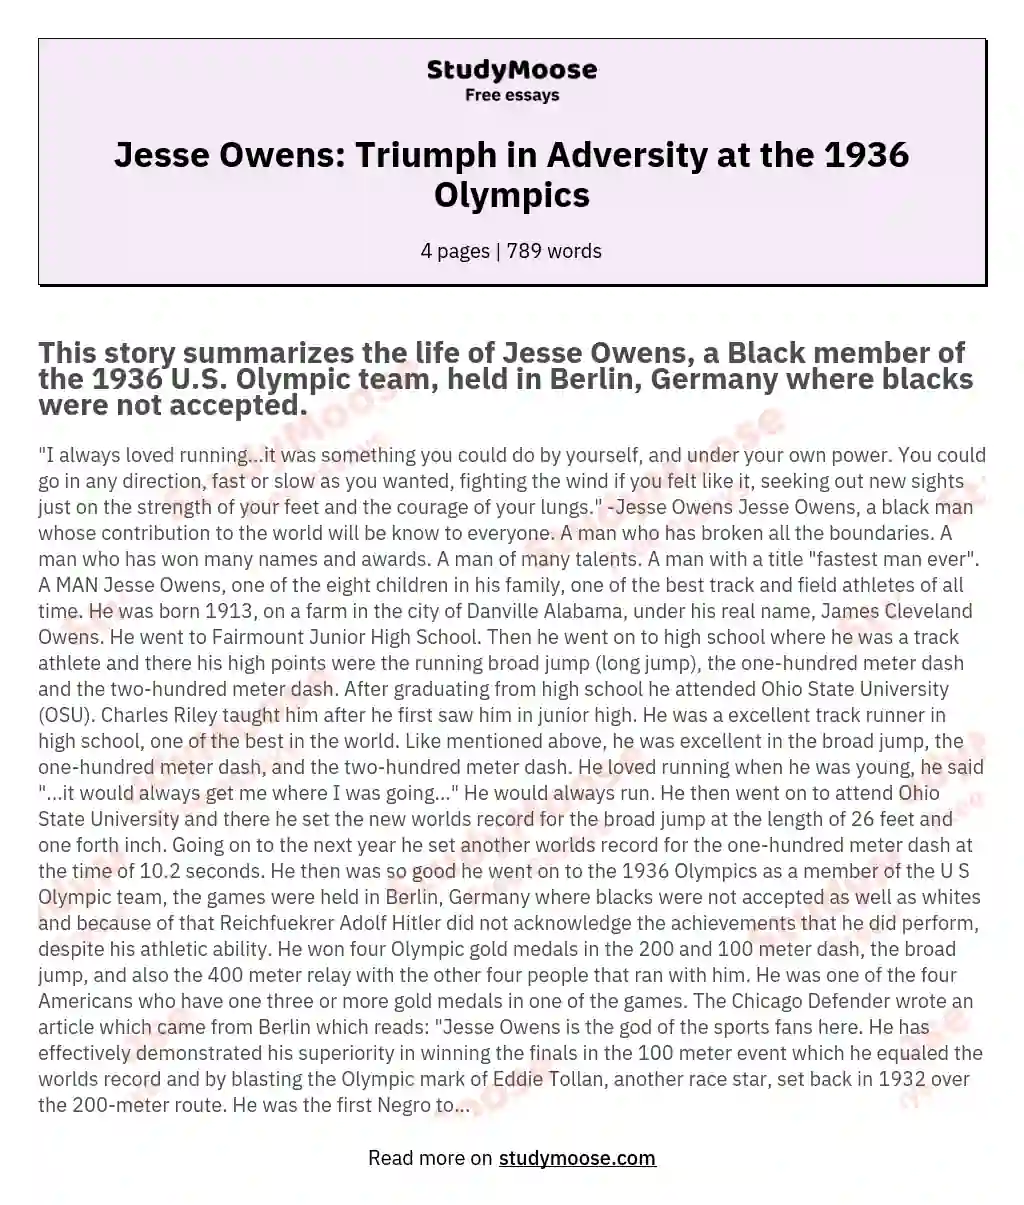 Jesse Owens: Triumph in Adversity at the 1936 Olympics essay